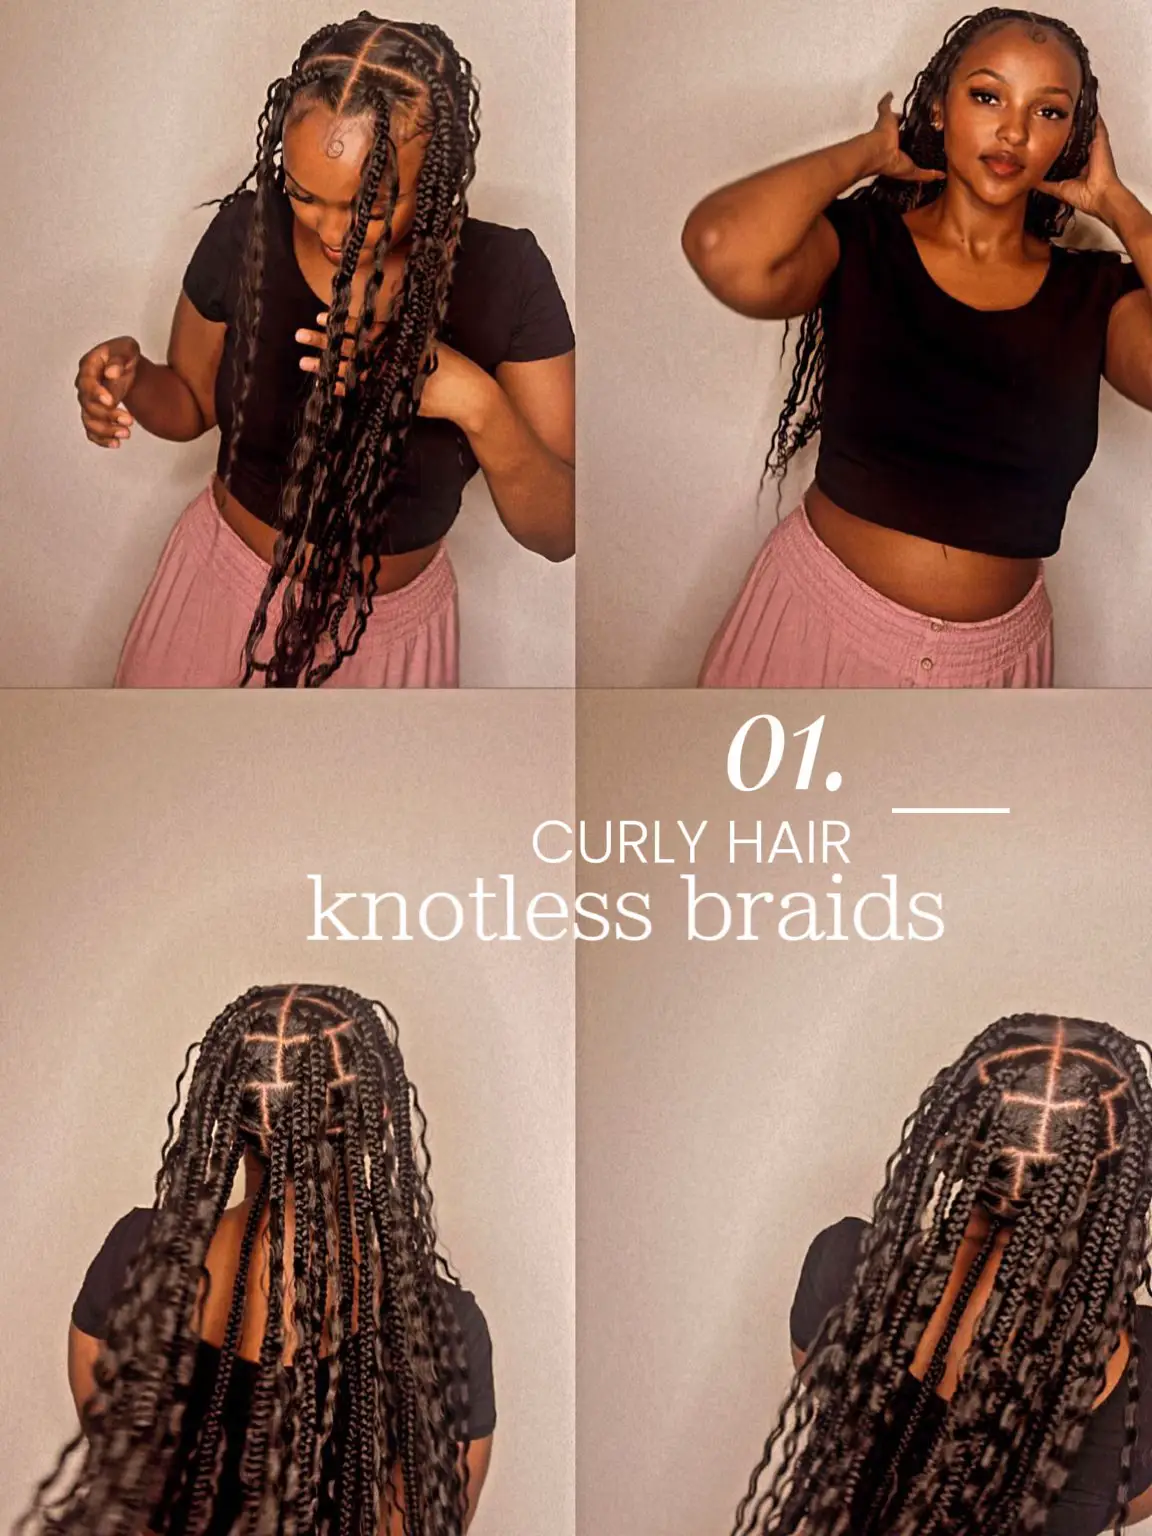 Braid is an essential part of me. Style: SMedium Knotless Braids